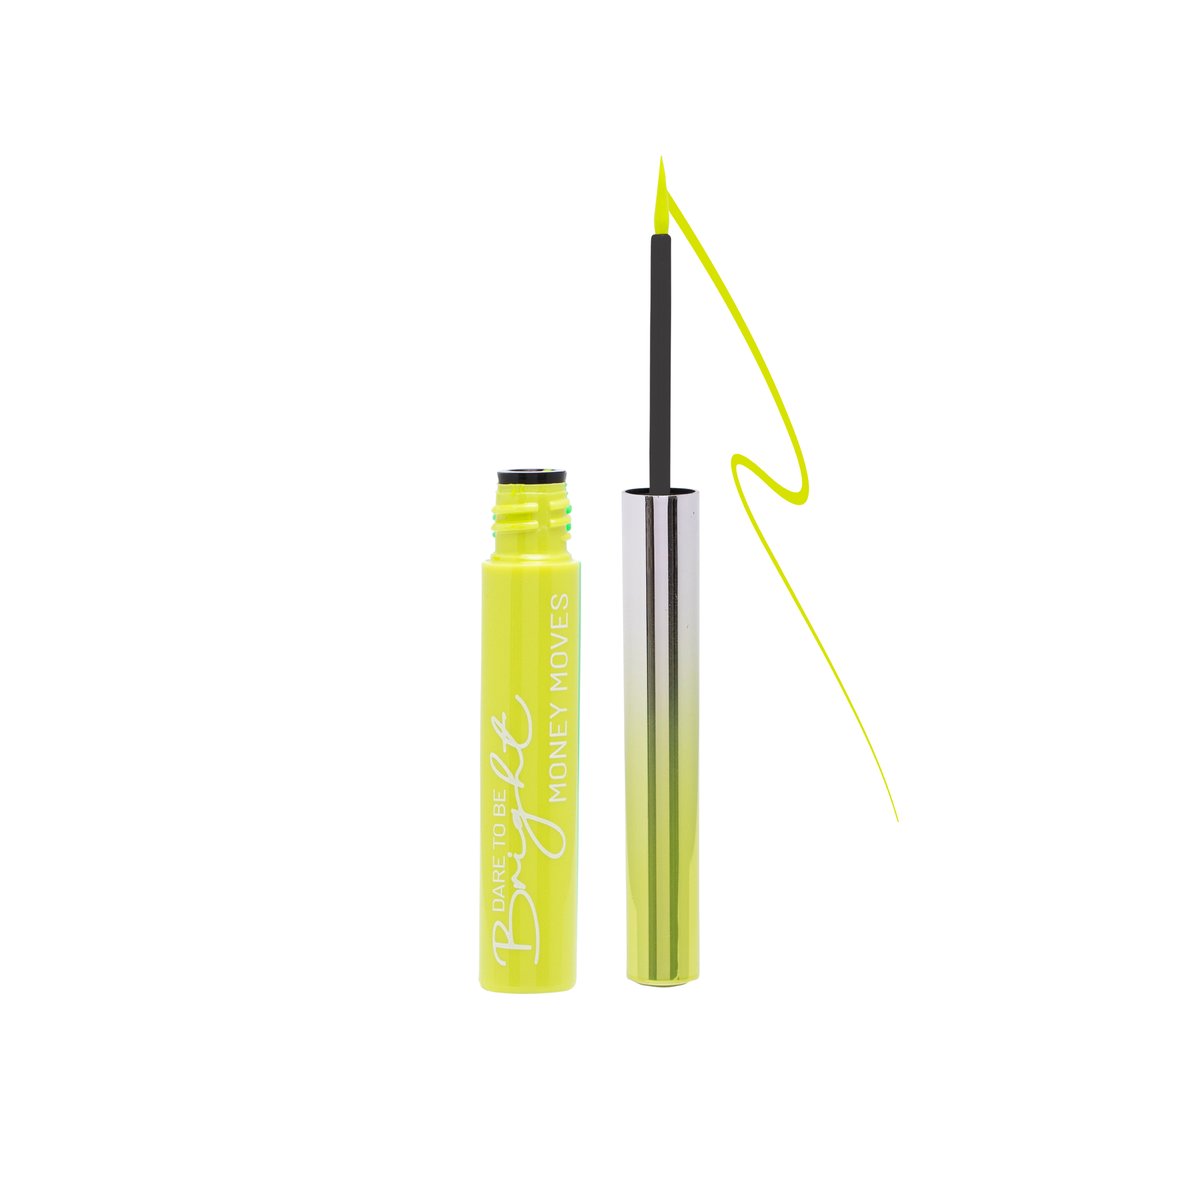 BEAUTY CREATIONS DARE TO BE BRIGHT EYELINER